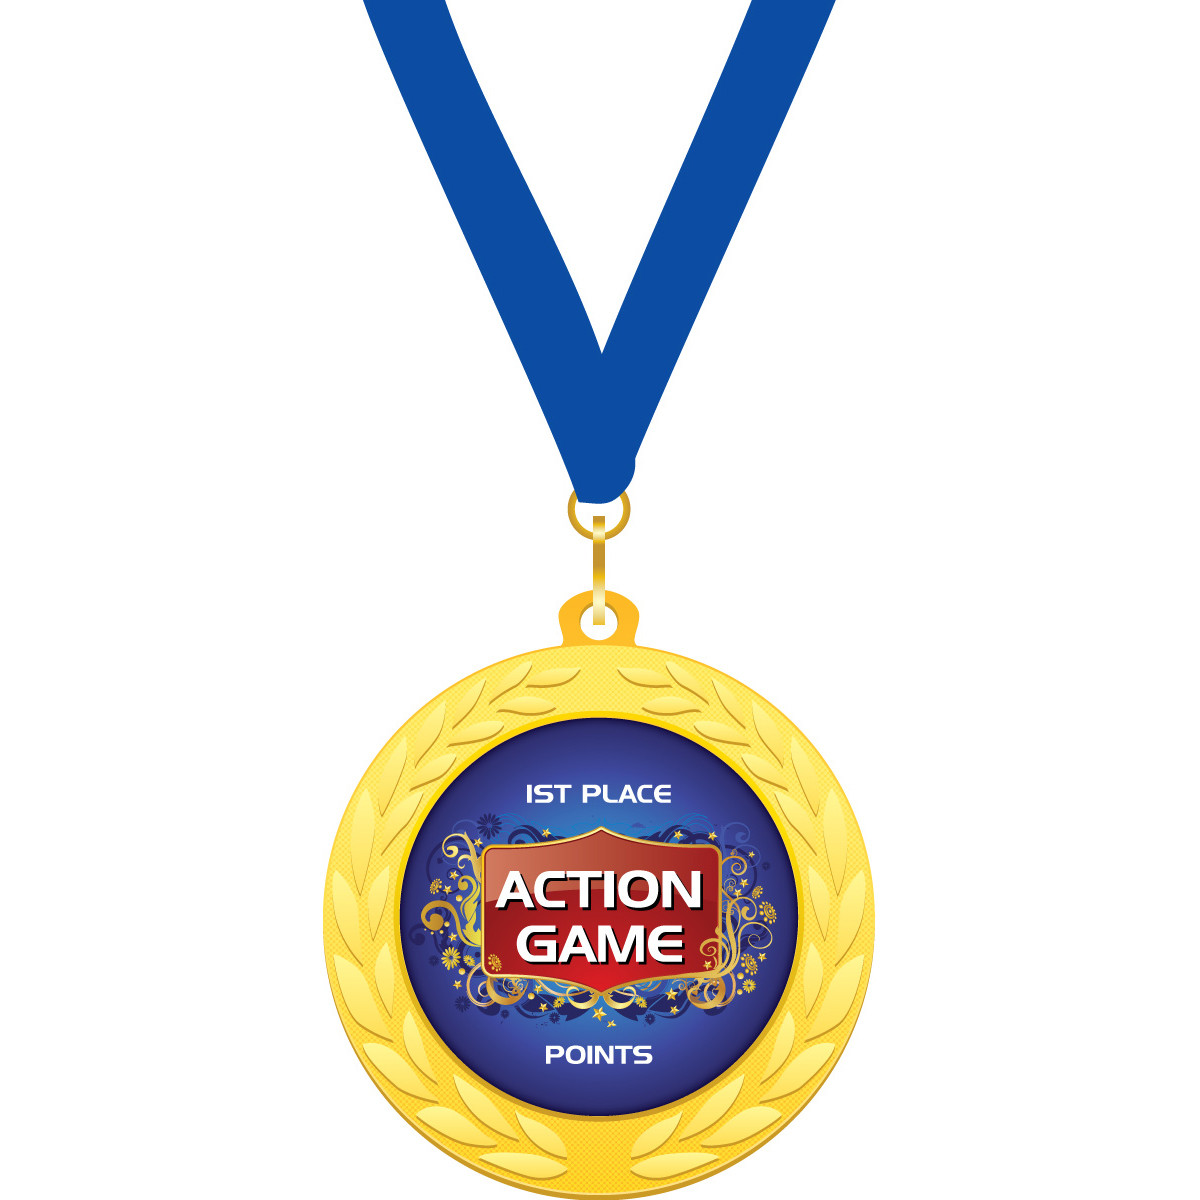 Custom 2 in. Gold Medallion with Blue Neck Ribbon (Action Game - 1st Place)